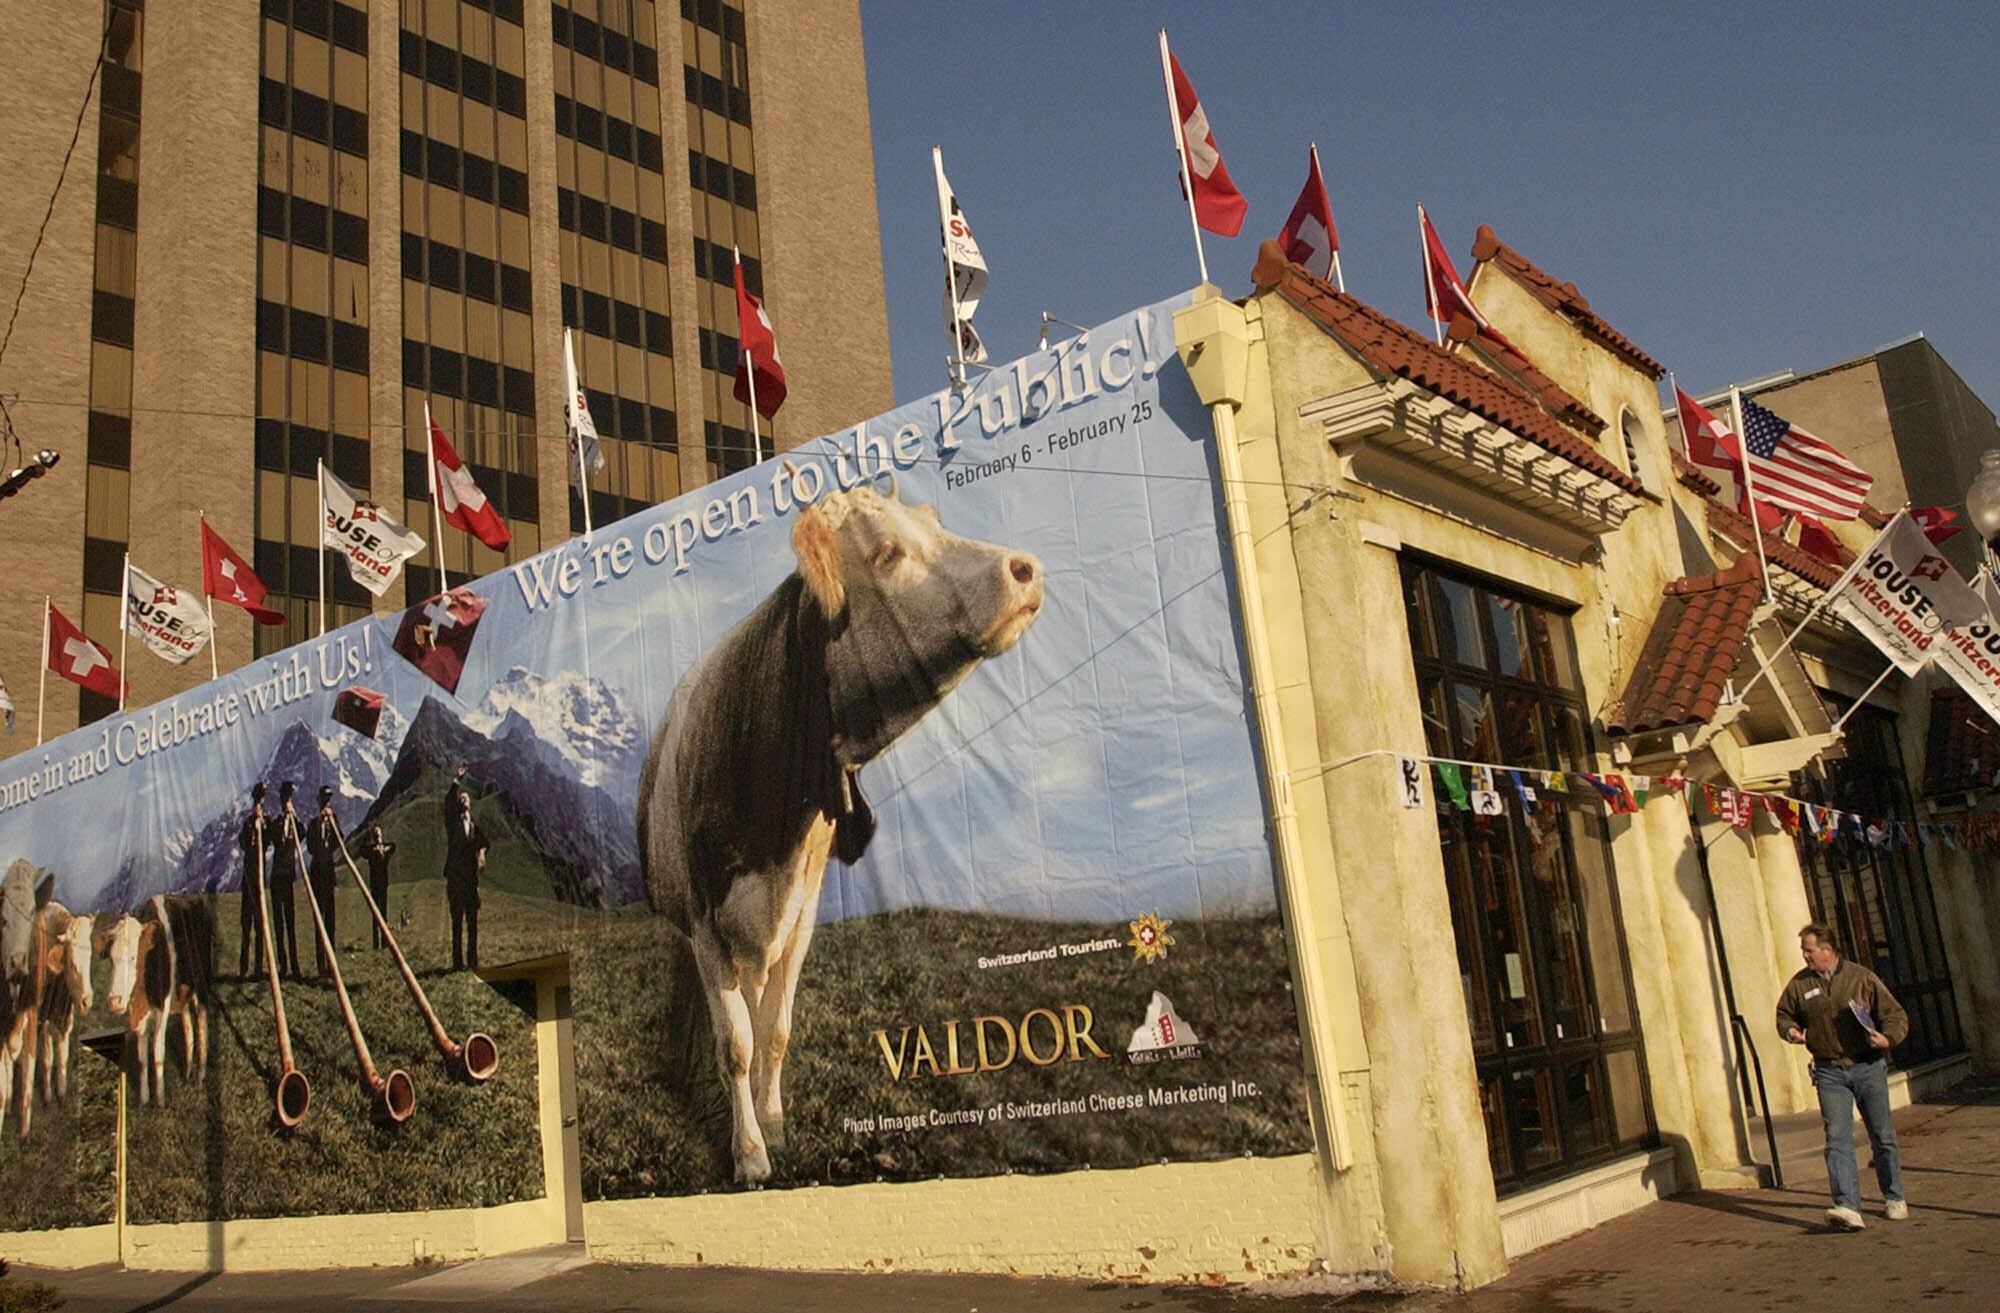 (Francisco Kjolseth | The Salt Lake Tribune) The Swiss hospitality house along Market Street in Salt Lake City greets visitors on one side with a large mural of cows ahead of the 2002 Winter Olympics, Feb. 5, 2002. Various national houses and centers were leased in the area during the Games.